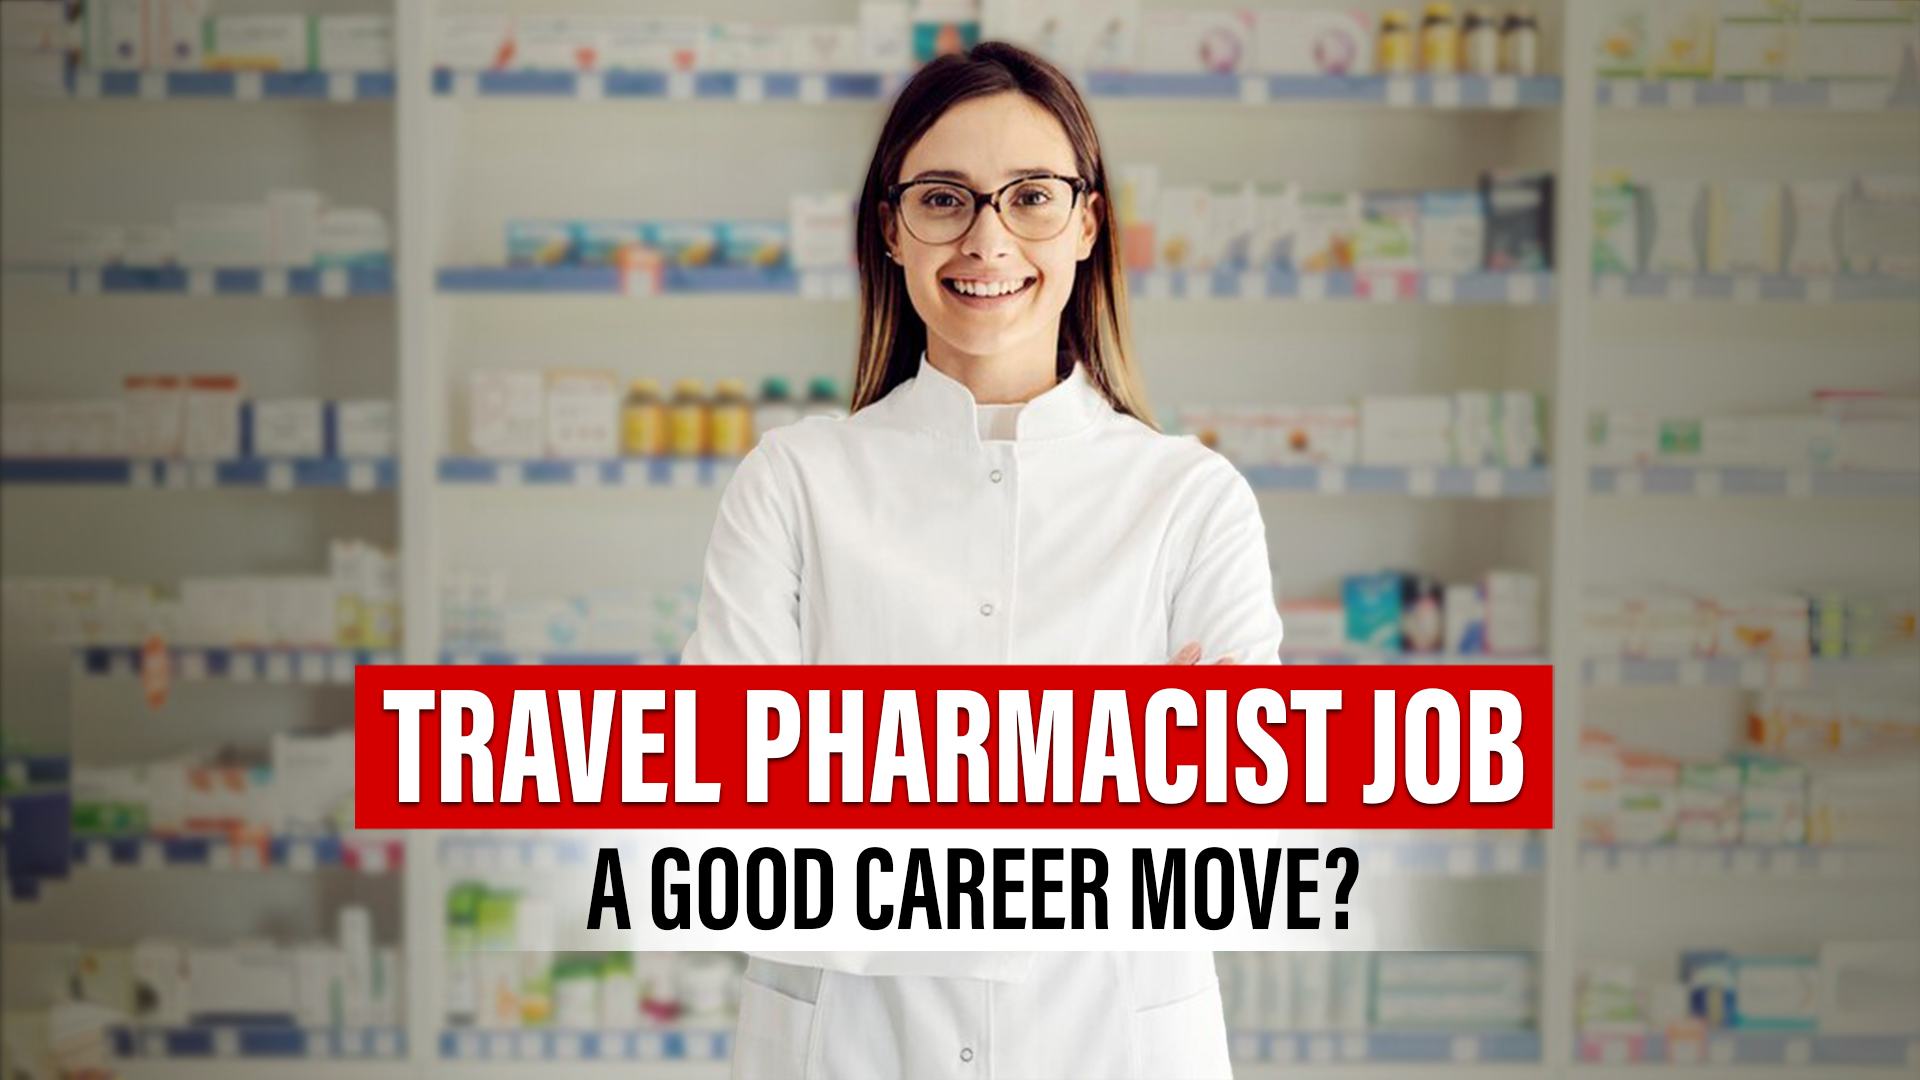 How Travel Pharmacist Job Opportunities Can Be a Good Career Move?